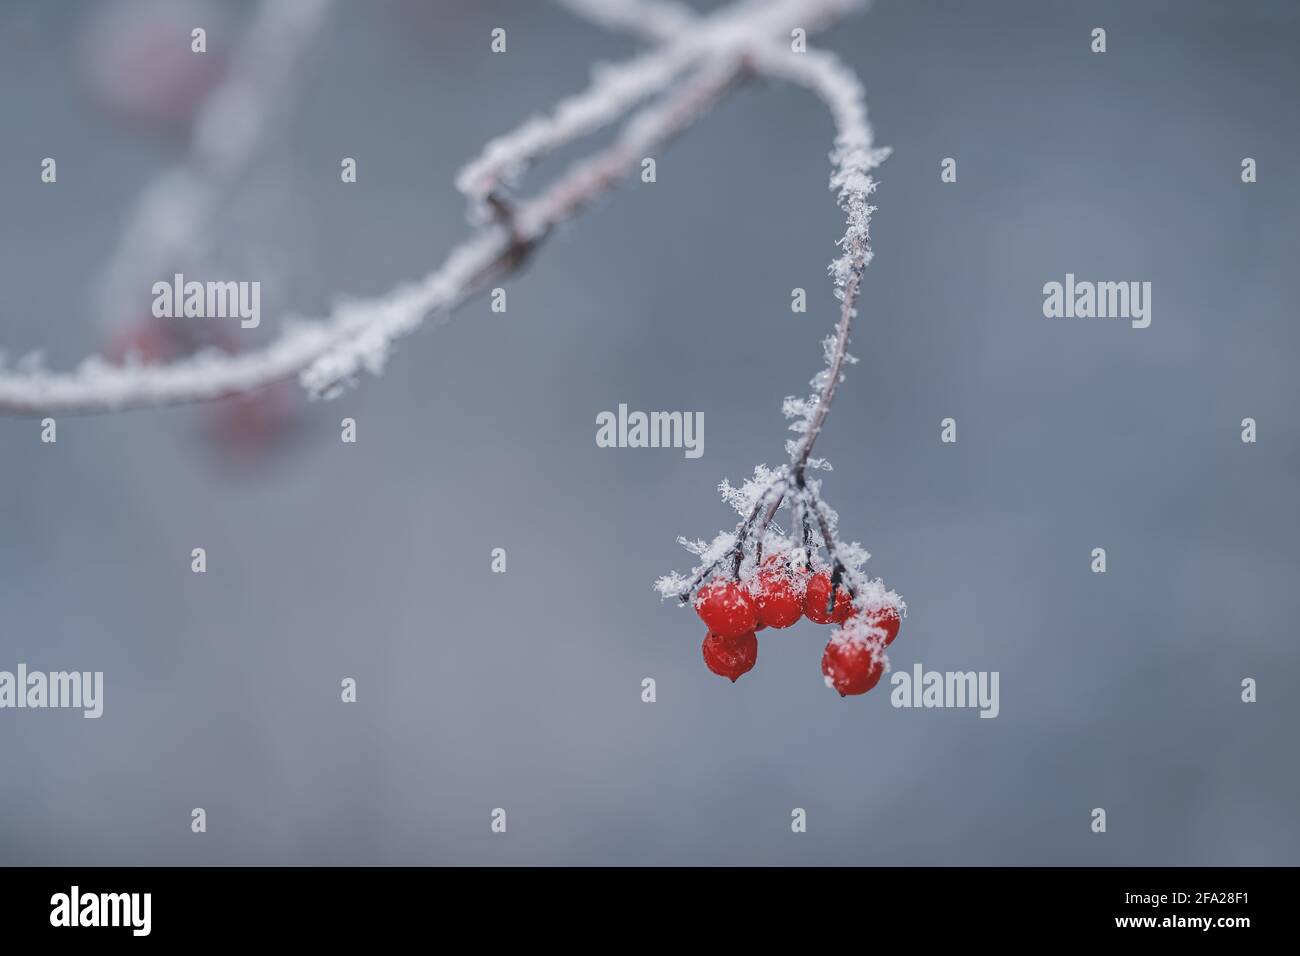 Branch of rowan with red berries covered with snow Stock Photo